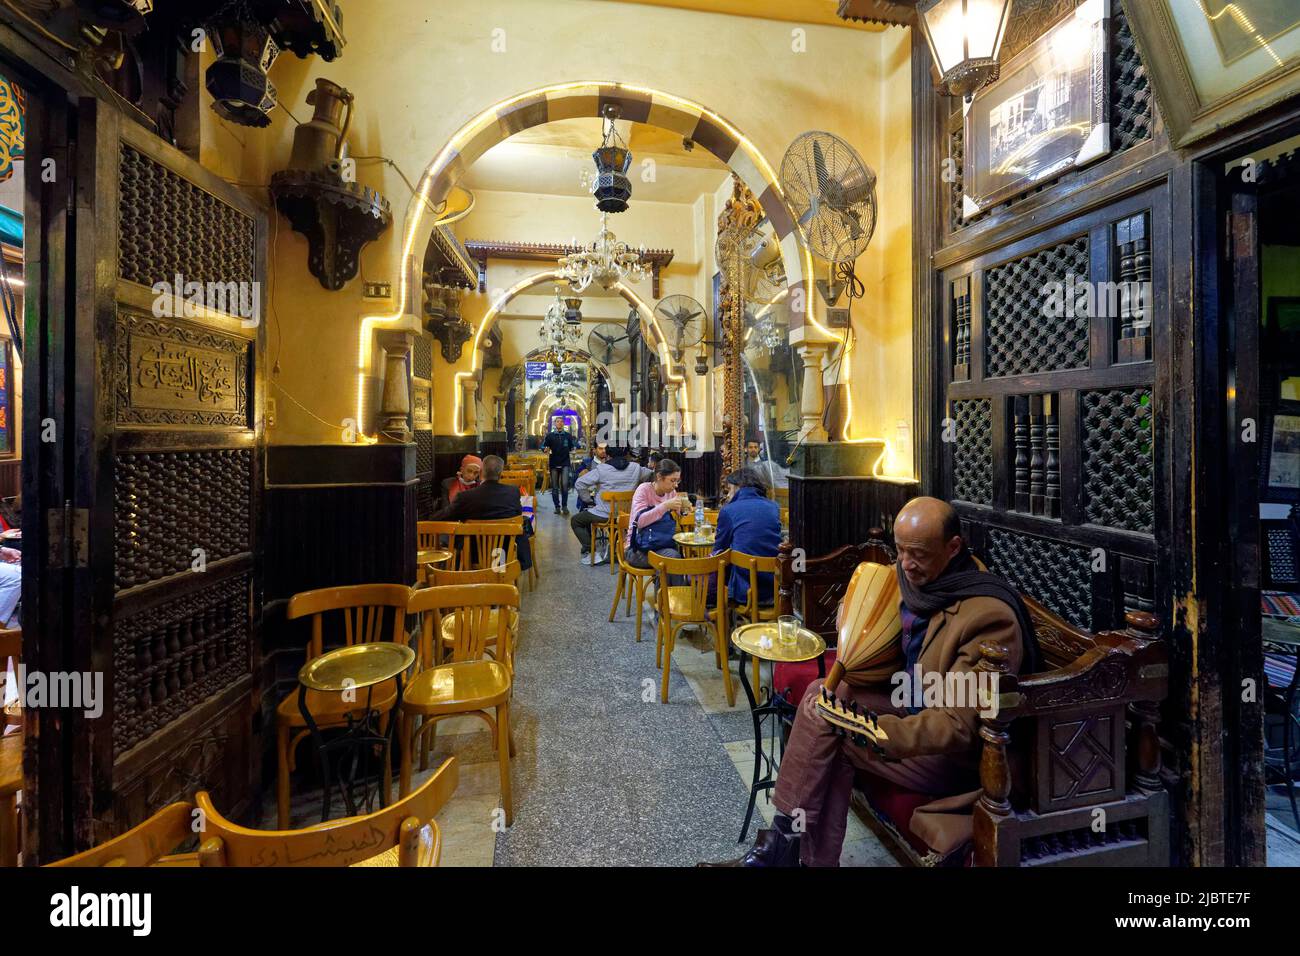 Egypt, Cairo, Islamic Cairo, old town listed as World Heritage by UNESCO, Khan al-Khalili souk, El-Fishawi cafe, musician Stock Photo